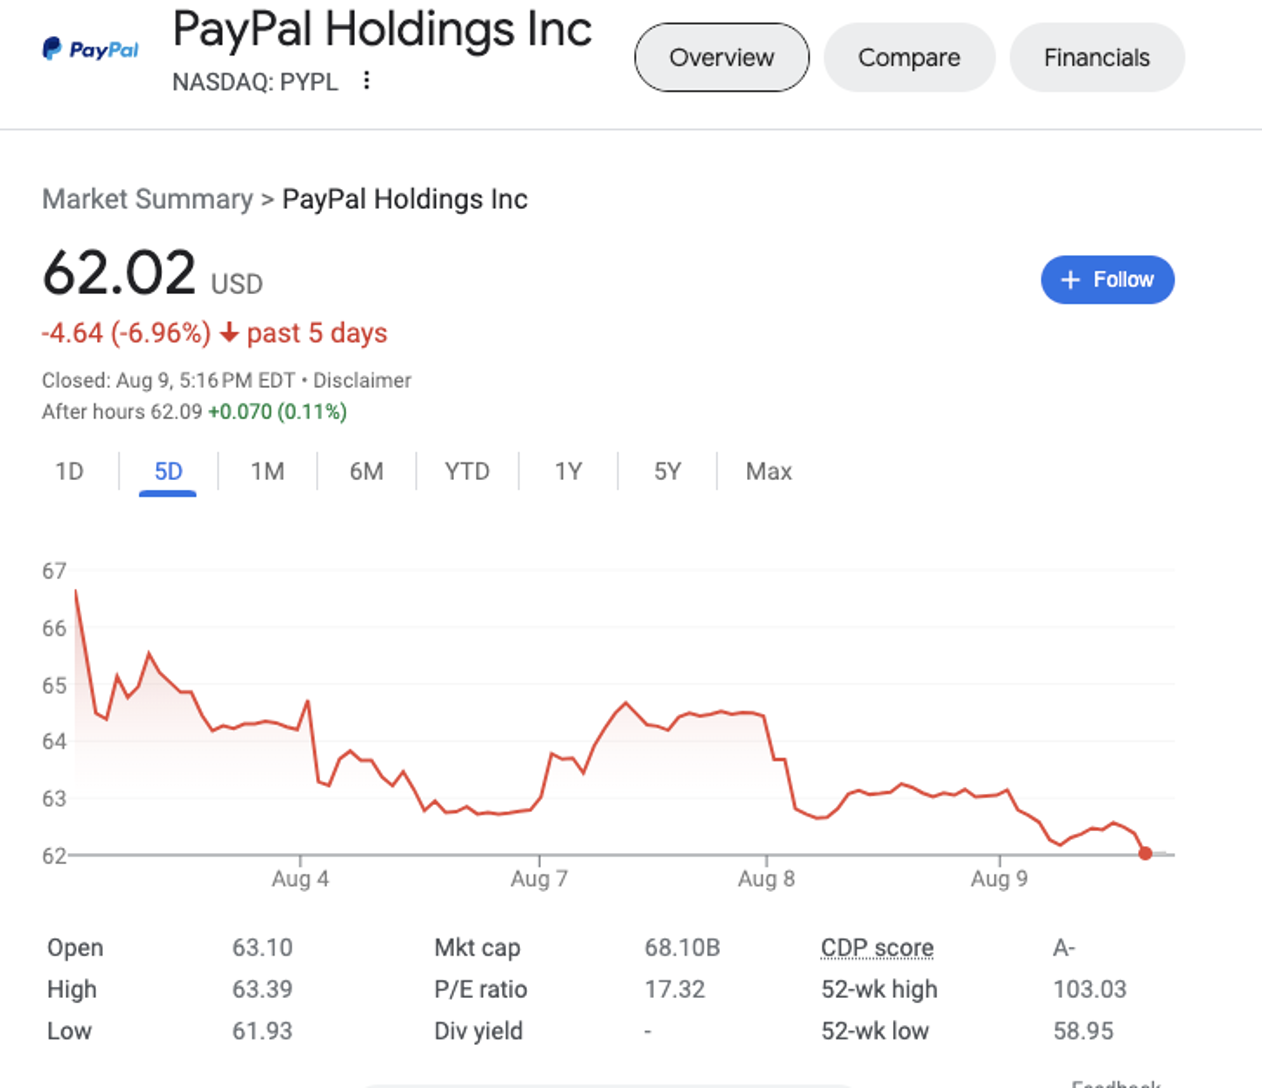 PayPal's stock